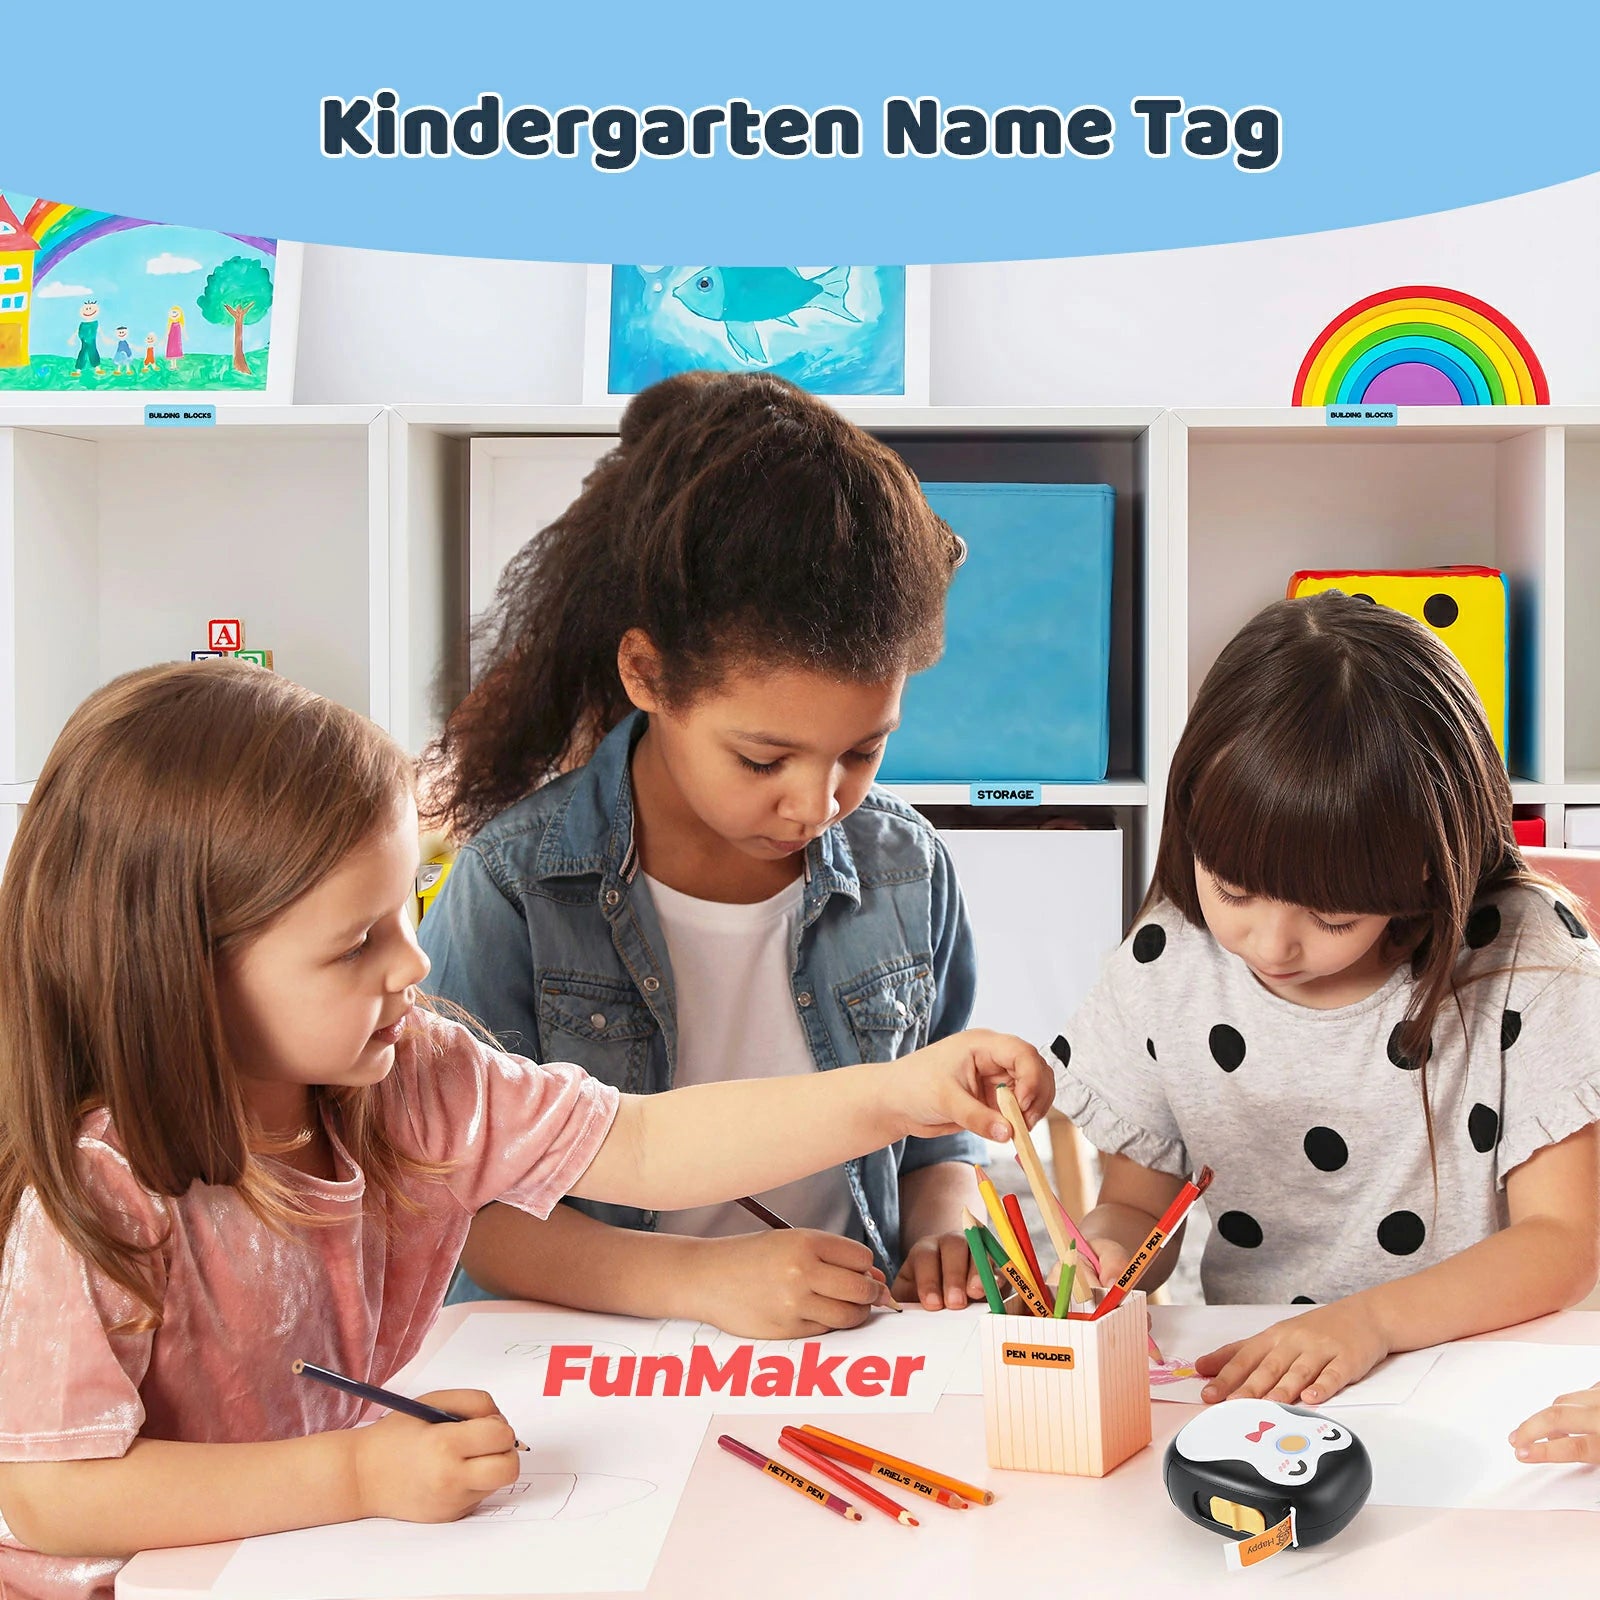 MUNBYN black Penguin Wireless Pocket Thermal Label Printer can be used to create kindergarten name tags.